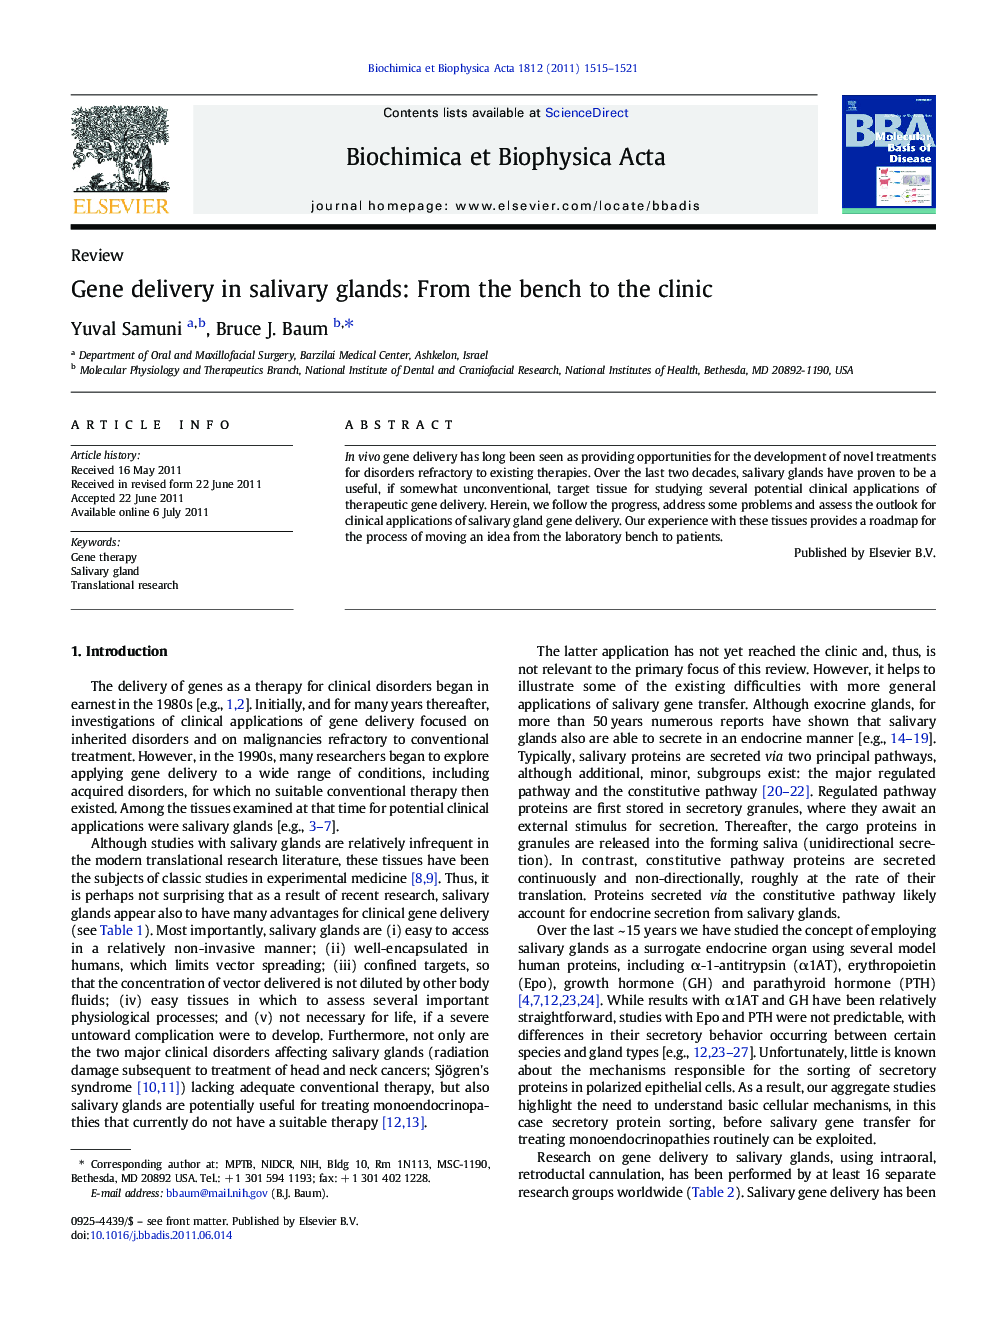 Gene delivery in salivary glands: From the bench to the clinic